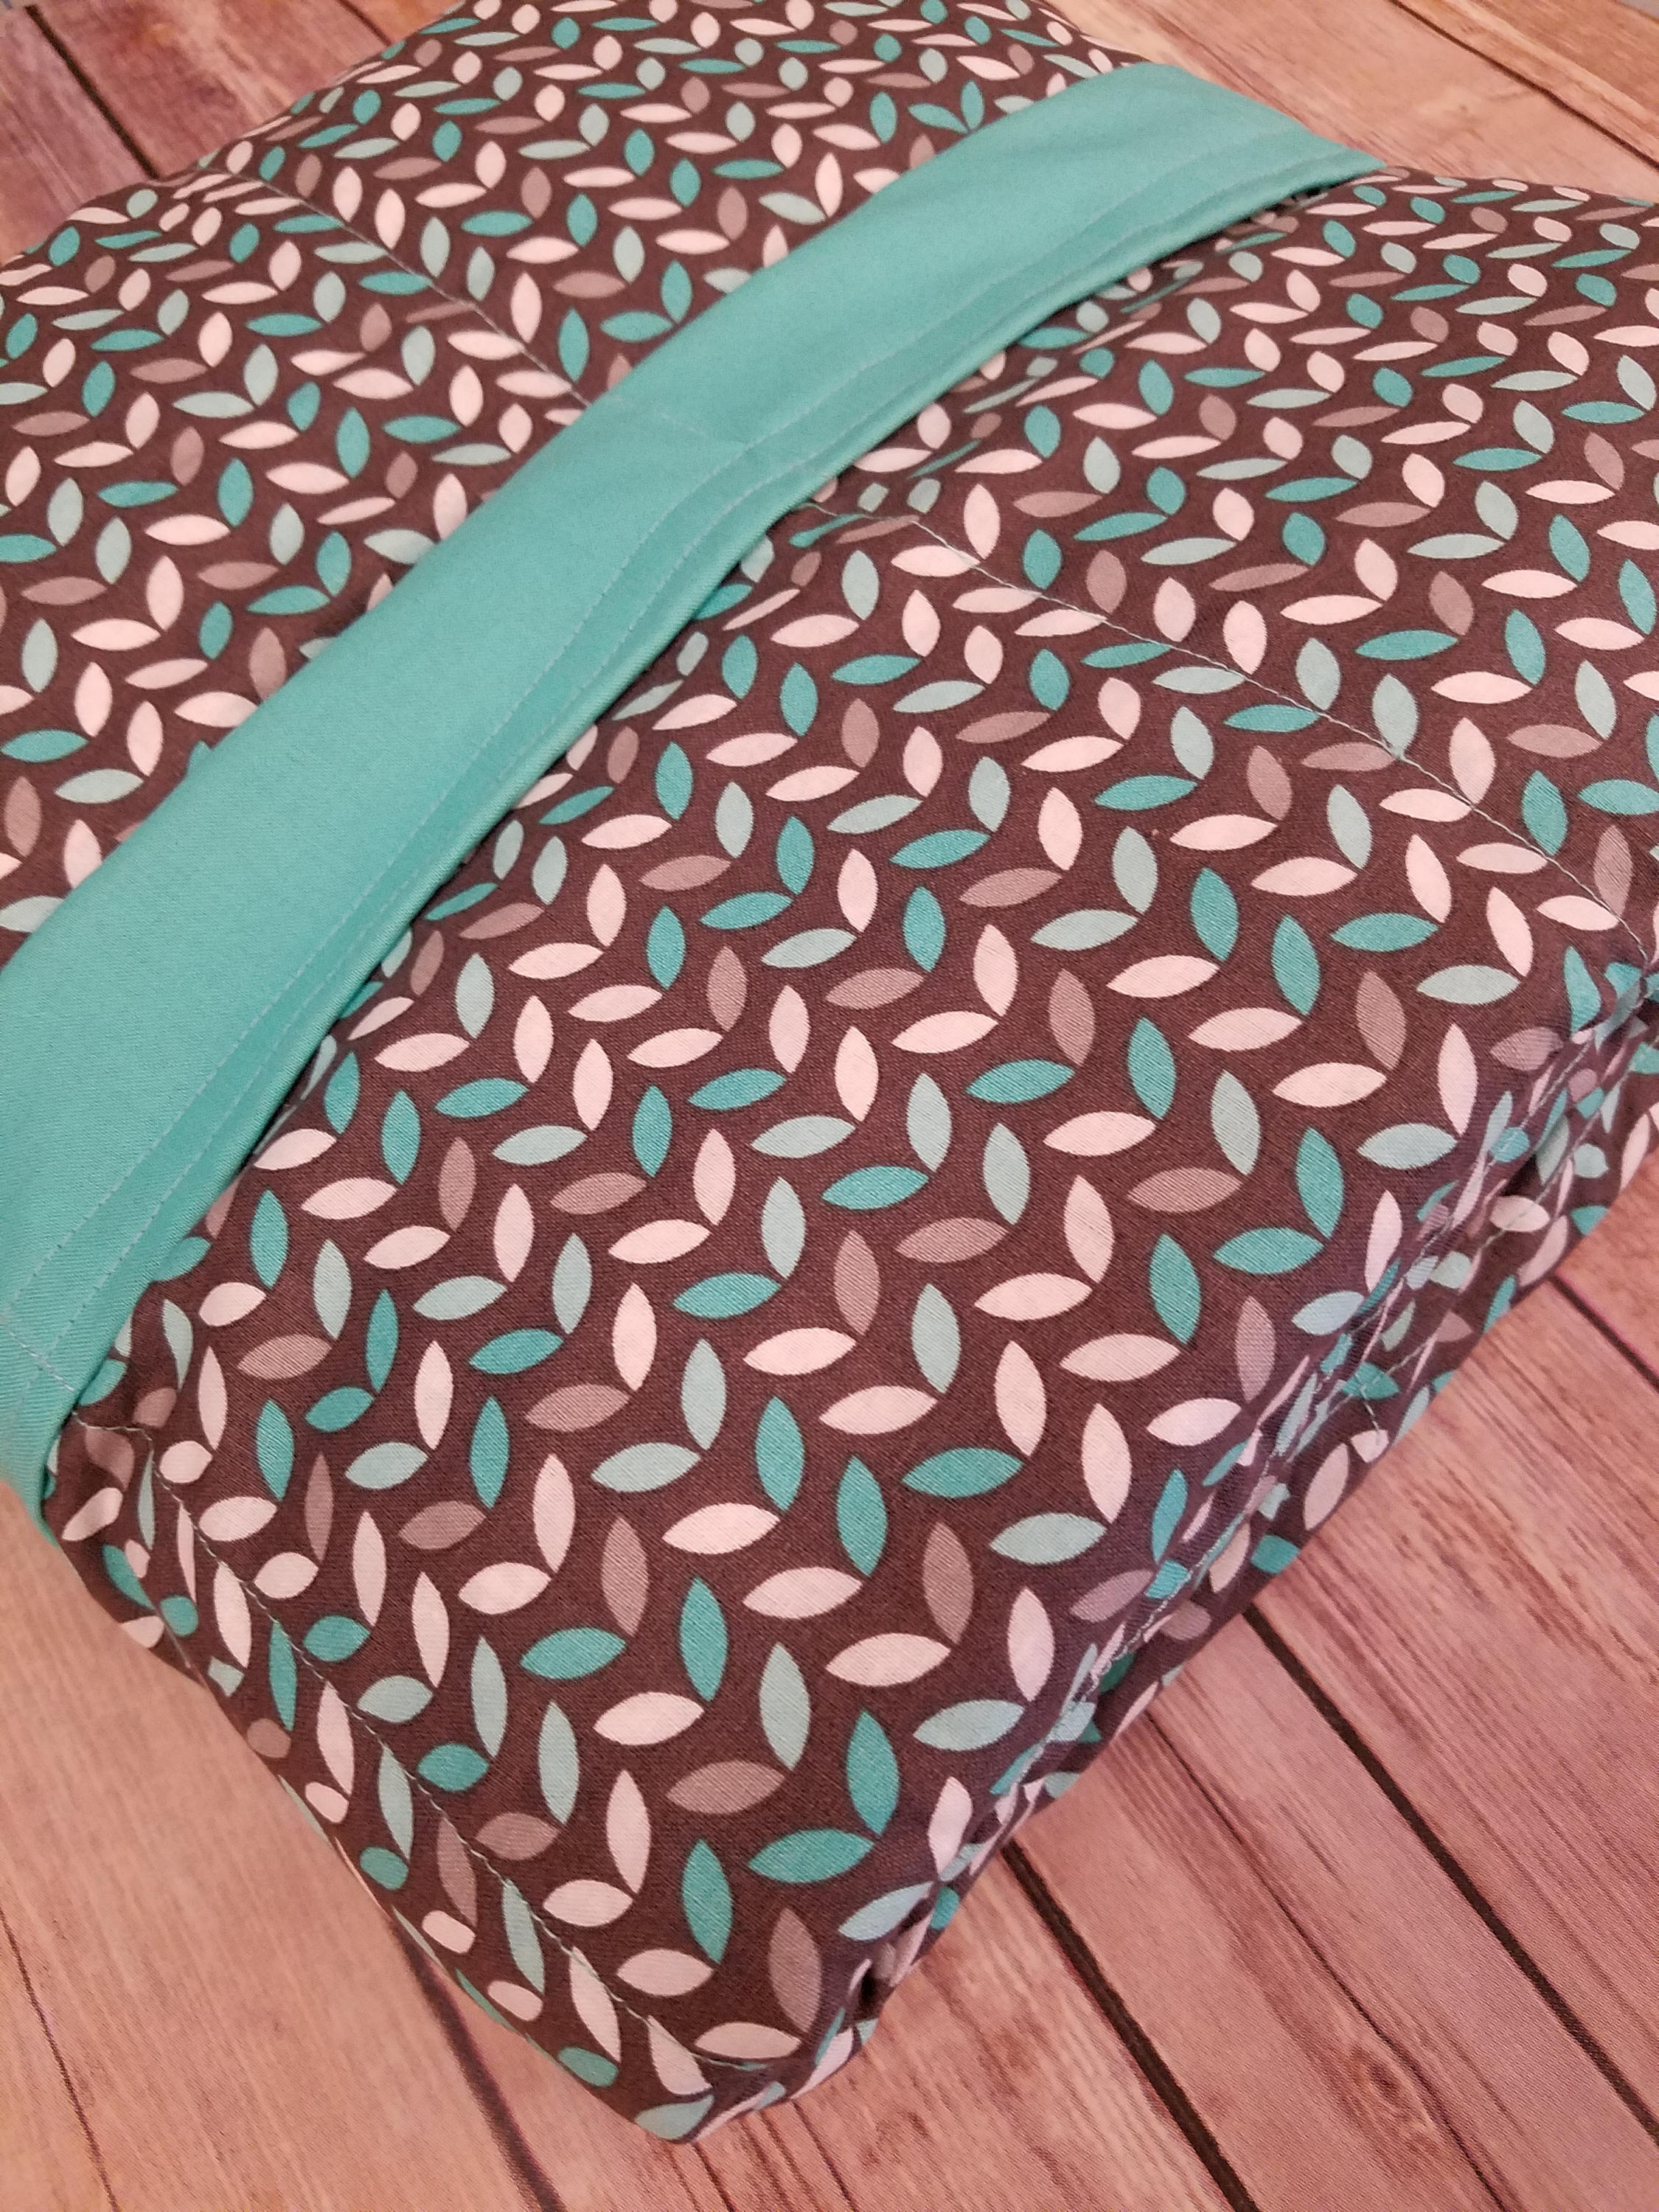 Weighted Blanket, 10 Pound, Mint Gray Leaves, Teal Back, 40x50, READY